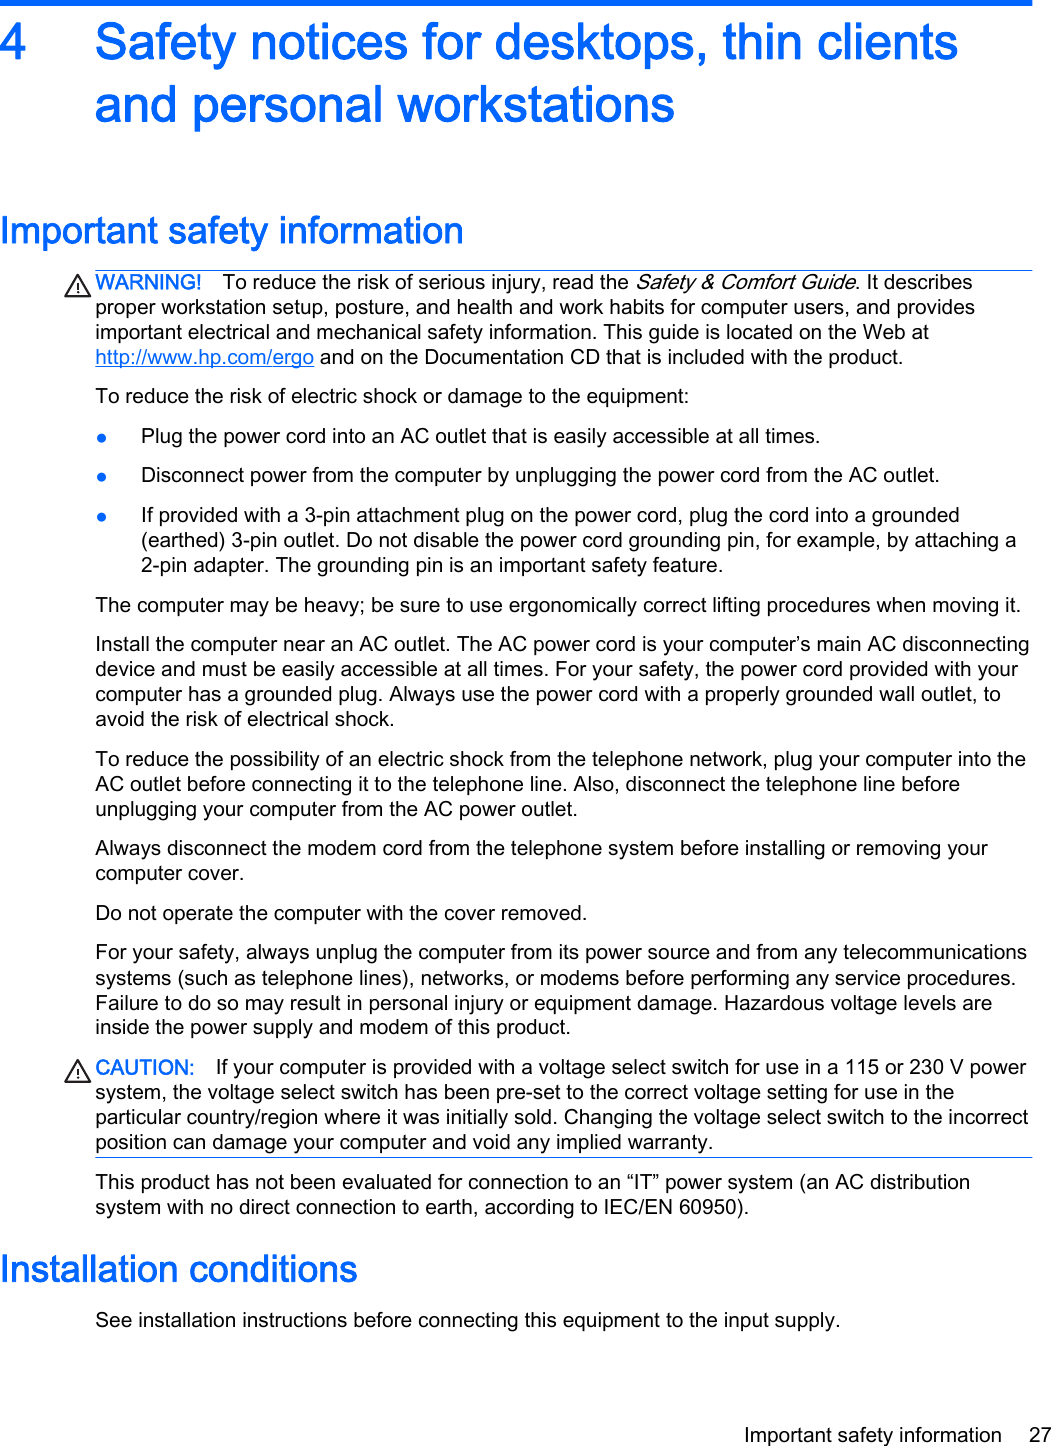 4 Safety notices for desktops, thin clientsand personal workstationsImportant safety informationWARNING! To reduce the risk of serious injury, read the Safety &amp; Comfort Guide. It describesproper workstation setup, posture, and health and work habits for computer users, and providesimportant electrical and mechanical safety information. This guide is located on the Web athttp://www.hp.com/ergo and on the Documentation CD that is included with the product.To reduce the risk of electric shock or damage to the equipment:●Plug the power cord into an AC outlet that is easily accessible at all times.●Disconnect power from the computer by unplugging the power cord from the AC outlet.●If provided with a 3-pin attachment plug on the power cord, plug the cord into a grounded(earthed) 3-pin outlet. Do not disable the power cord grounding pin, for example, by attaching a2-pin adapter. The grounding pin is an important safety feature.The computer may be heavy; be sure to use ergonomically correct lifting procedures when moving it.Install the computer near an AC outlet. The AC power cord is your computer’s main AC disconnectingdevice and must be easily accessible at all times. For your safety, the power cord provided with yourcomputer has a grounded plug. Always use the power cord with a properly grounded wall outlet, toavoid the risk of electrical shock.To reduce the possibility of an electric shock from the telephone network, plug your computer into theAC outlet before connecting it to the telephone line. Also, disconnect the telephone line beforeunplugging your computer from the AC power outlet.Always disconnect the modem cord from the telephone system before installing or removing yourcomputer cover.Do not operate the computer with the cover removed.For your safety, always unplug the computer from its power source and from any telecommunicationssystems (such as telephone lines), networks, or modems before performing any service procedures.Failure to do so may result in personal injury or equipment damage. Hazardous voltage levels areinside the power supply and modem of this product.CAUTION: If your computer is provided with a voltage select switch for use in a 115 or 230 V powersystem, the voltage select switch has been pre-set to the correct voltage setting for use in theparticular country/region where it was initially sold. Changing the voltage select switch to the incorrectposition can damage your computer and void any implied warranty.This product has not been evaluated for connection to an “IT” power system (an AC distributionsystem with no direct connection to earth, according to IEC/EN 60950).Installation conditionsSee installation instructions before connecting this equipment to the input supply.Important safety information 27